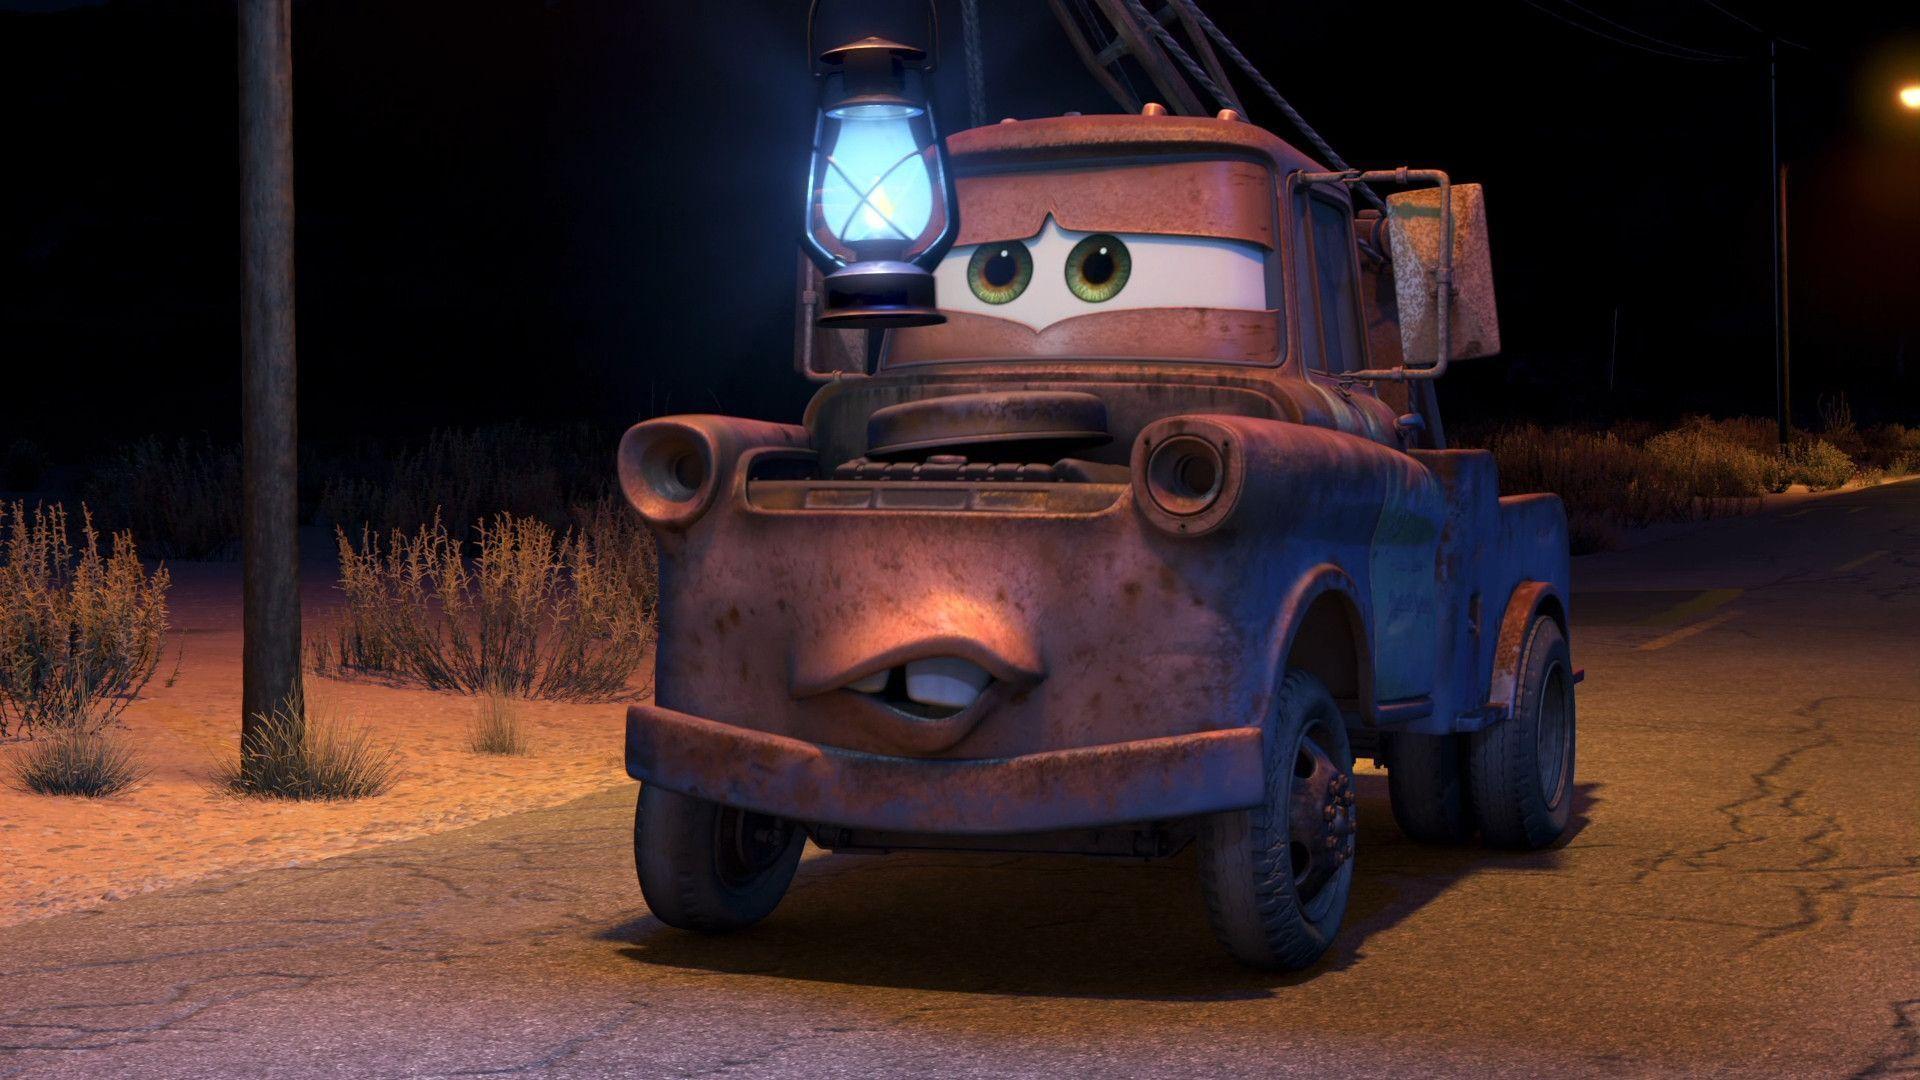 Free Mater From Cars Wallpapers, Free Mater From Cars HD.